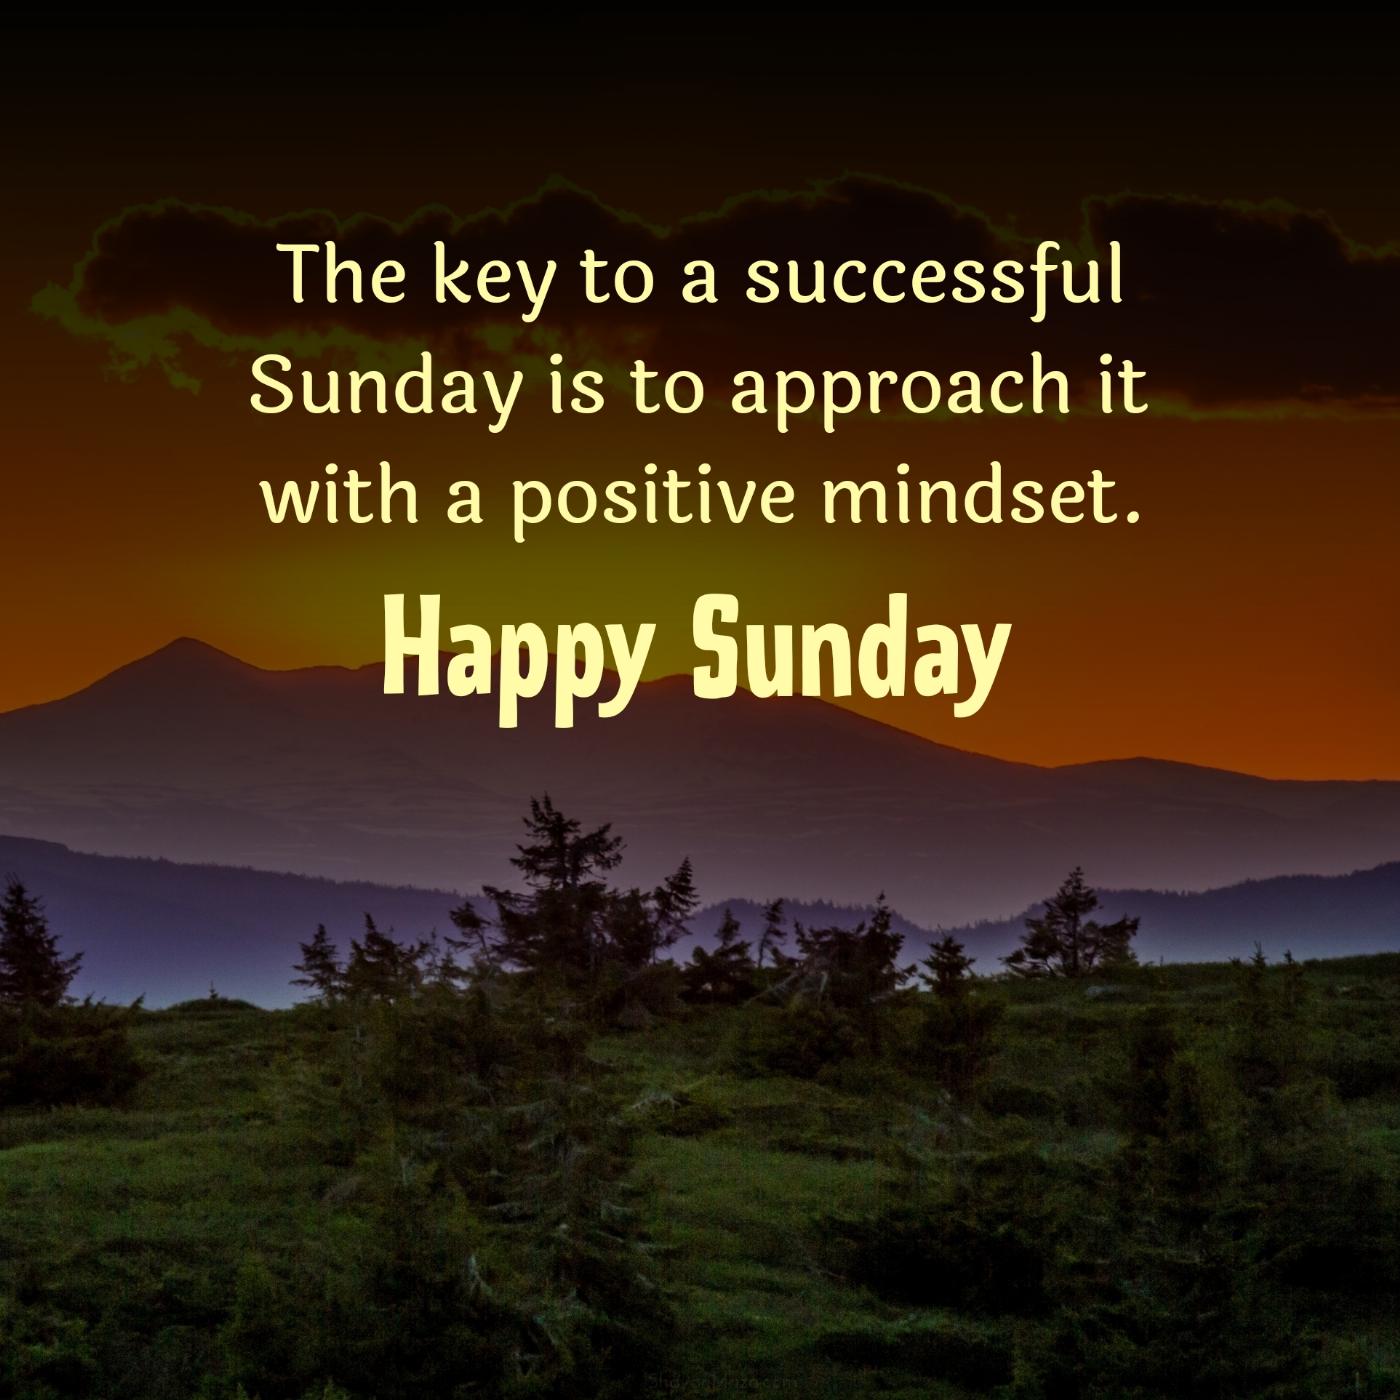 The key to a successful Sunday is to approach it with a positive mindset